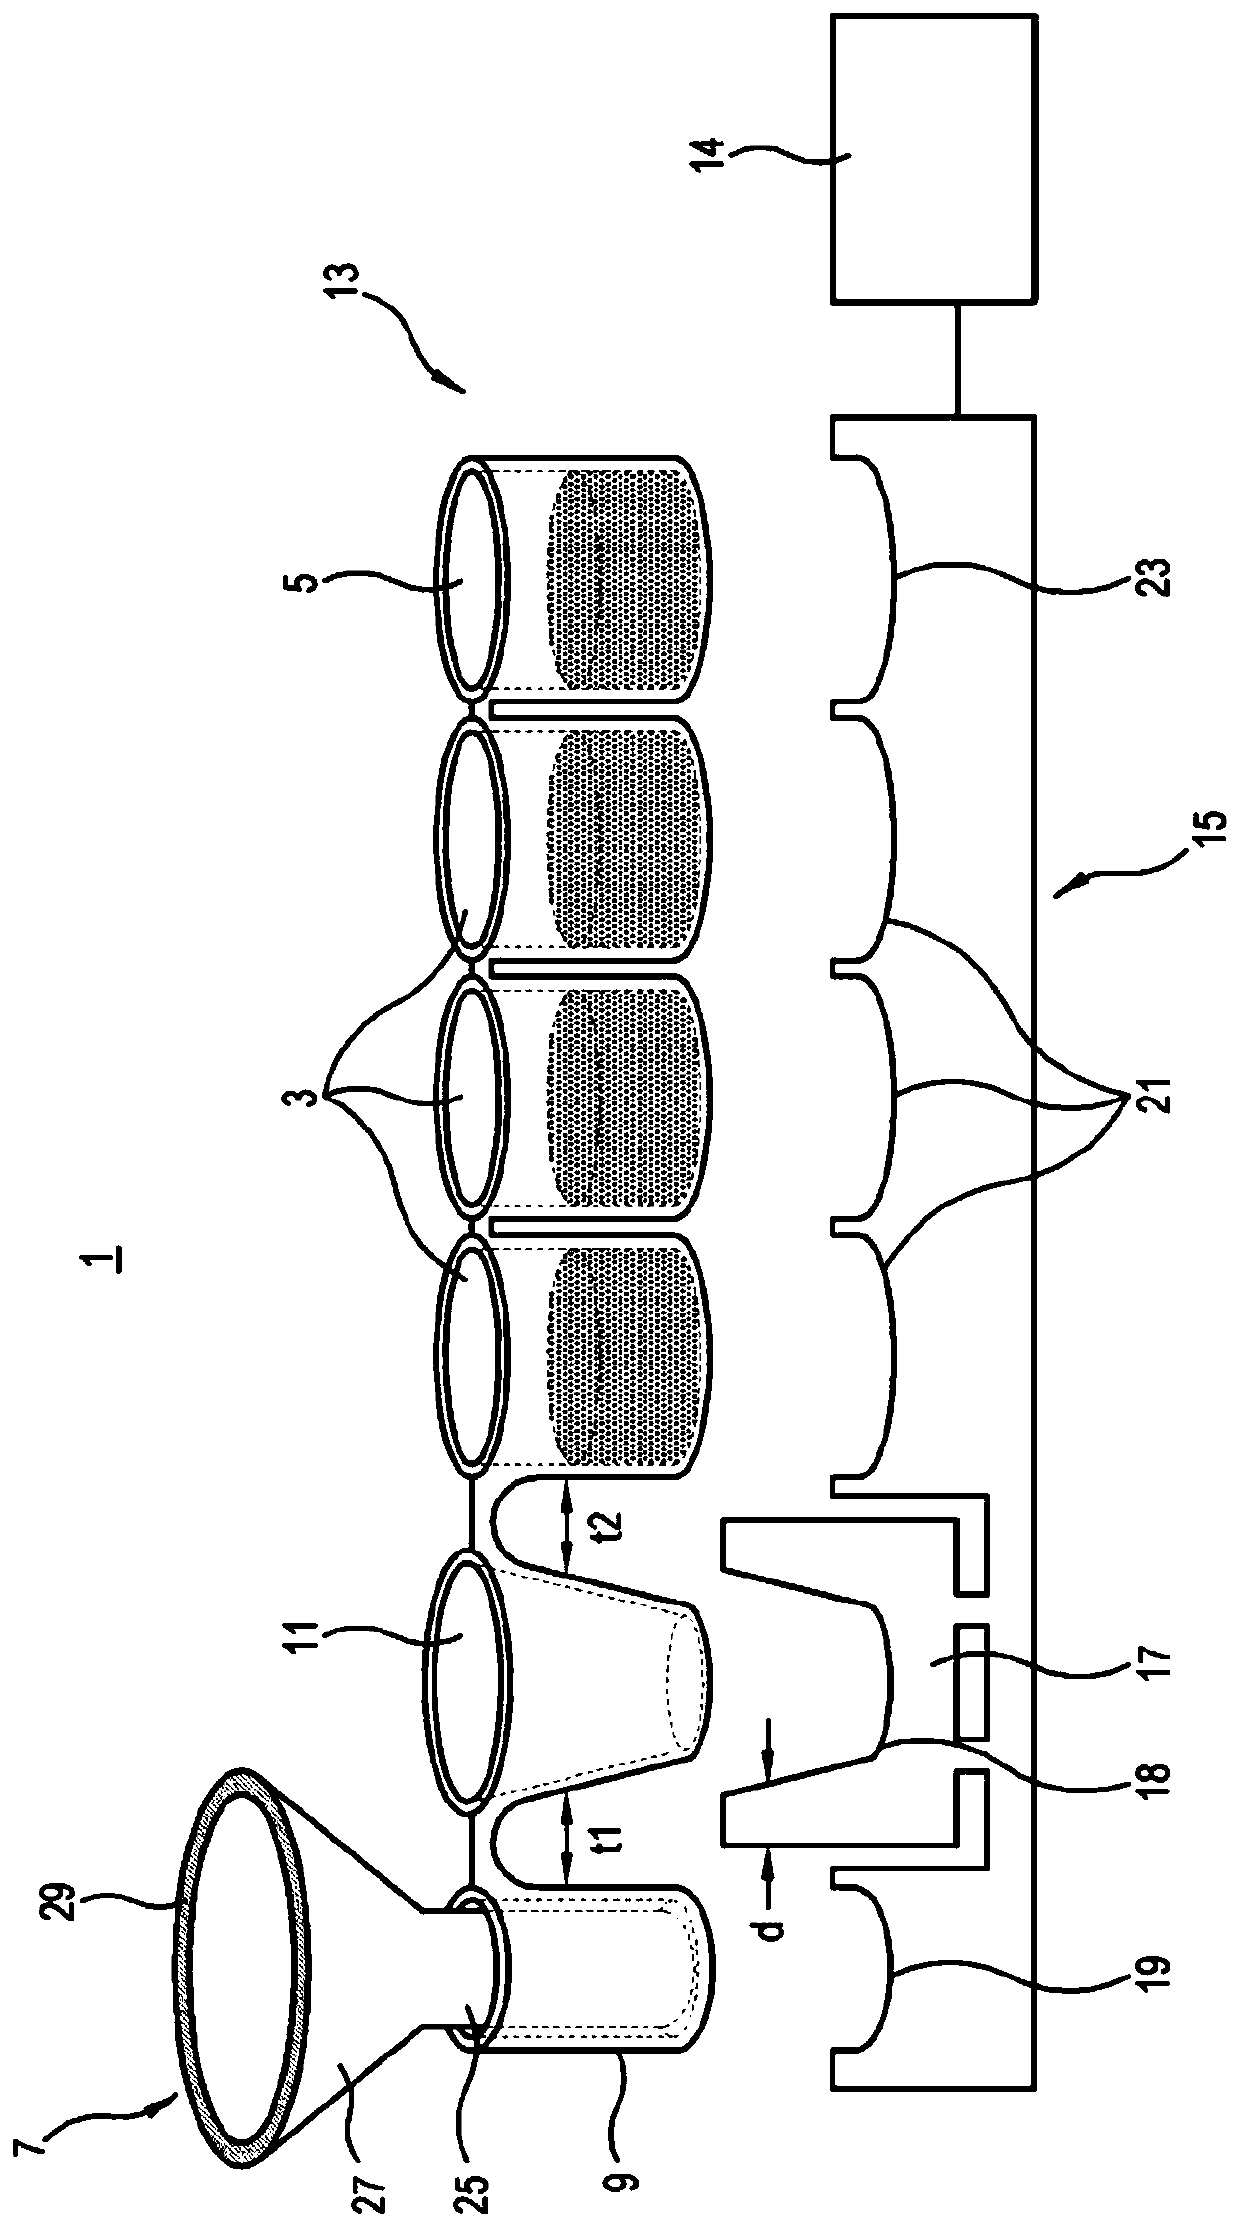 Automated immunoassay device and method using large magnetic particle complex